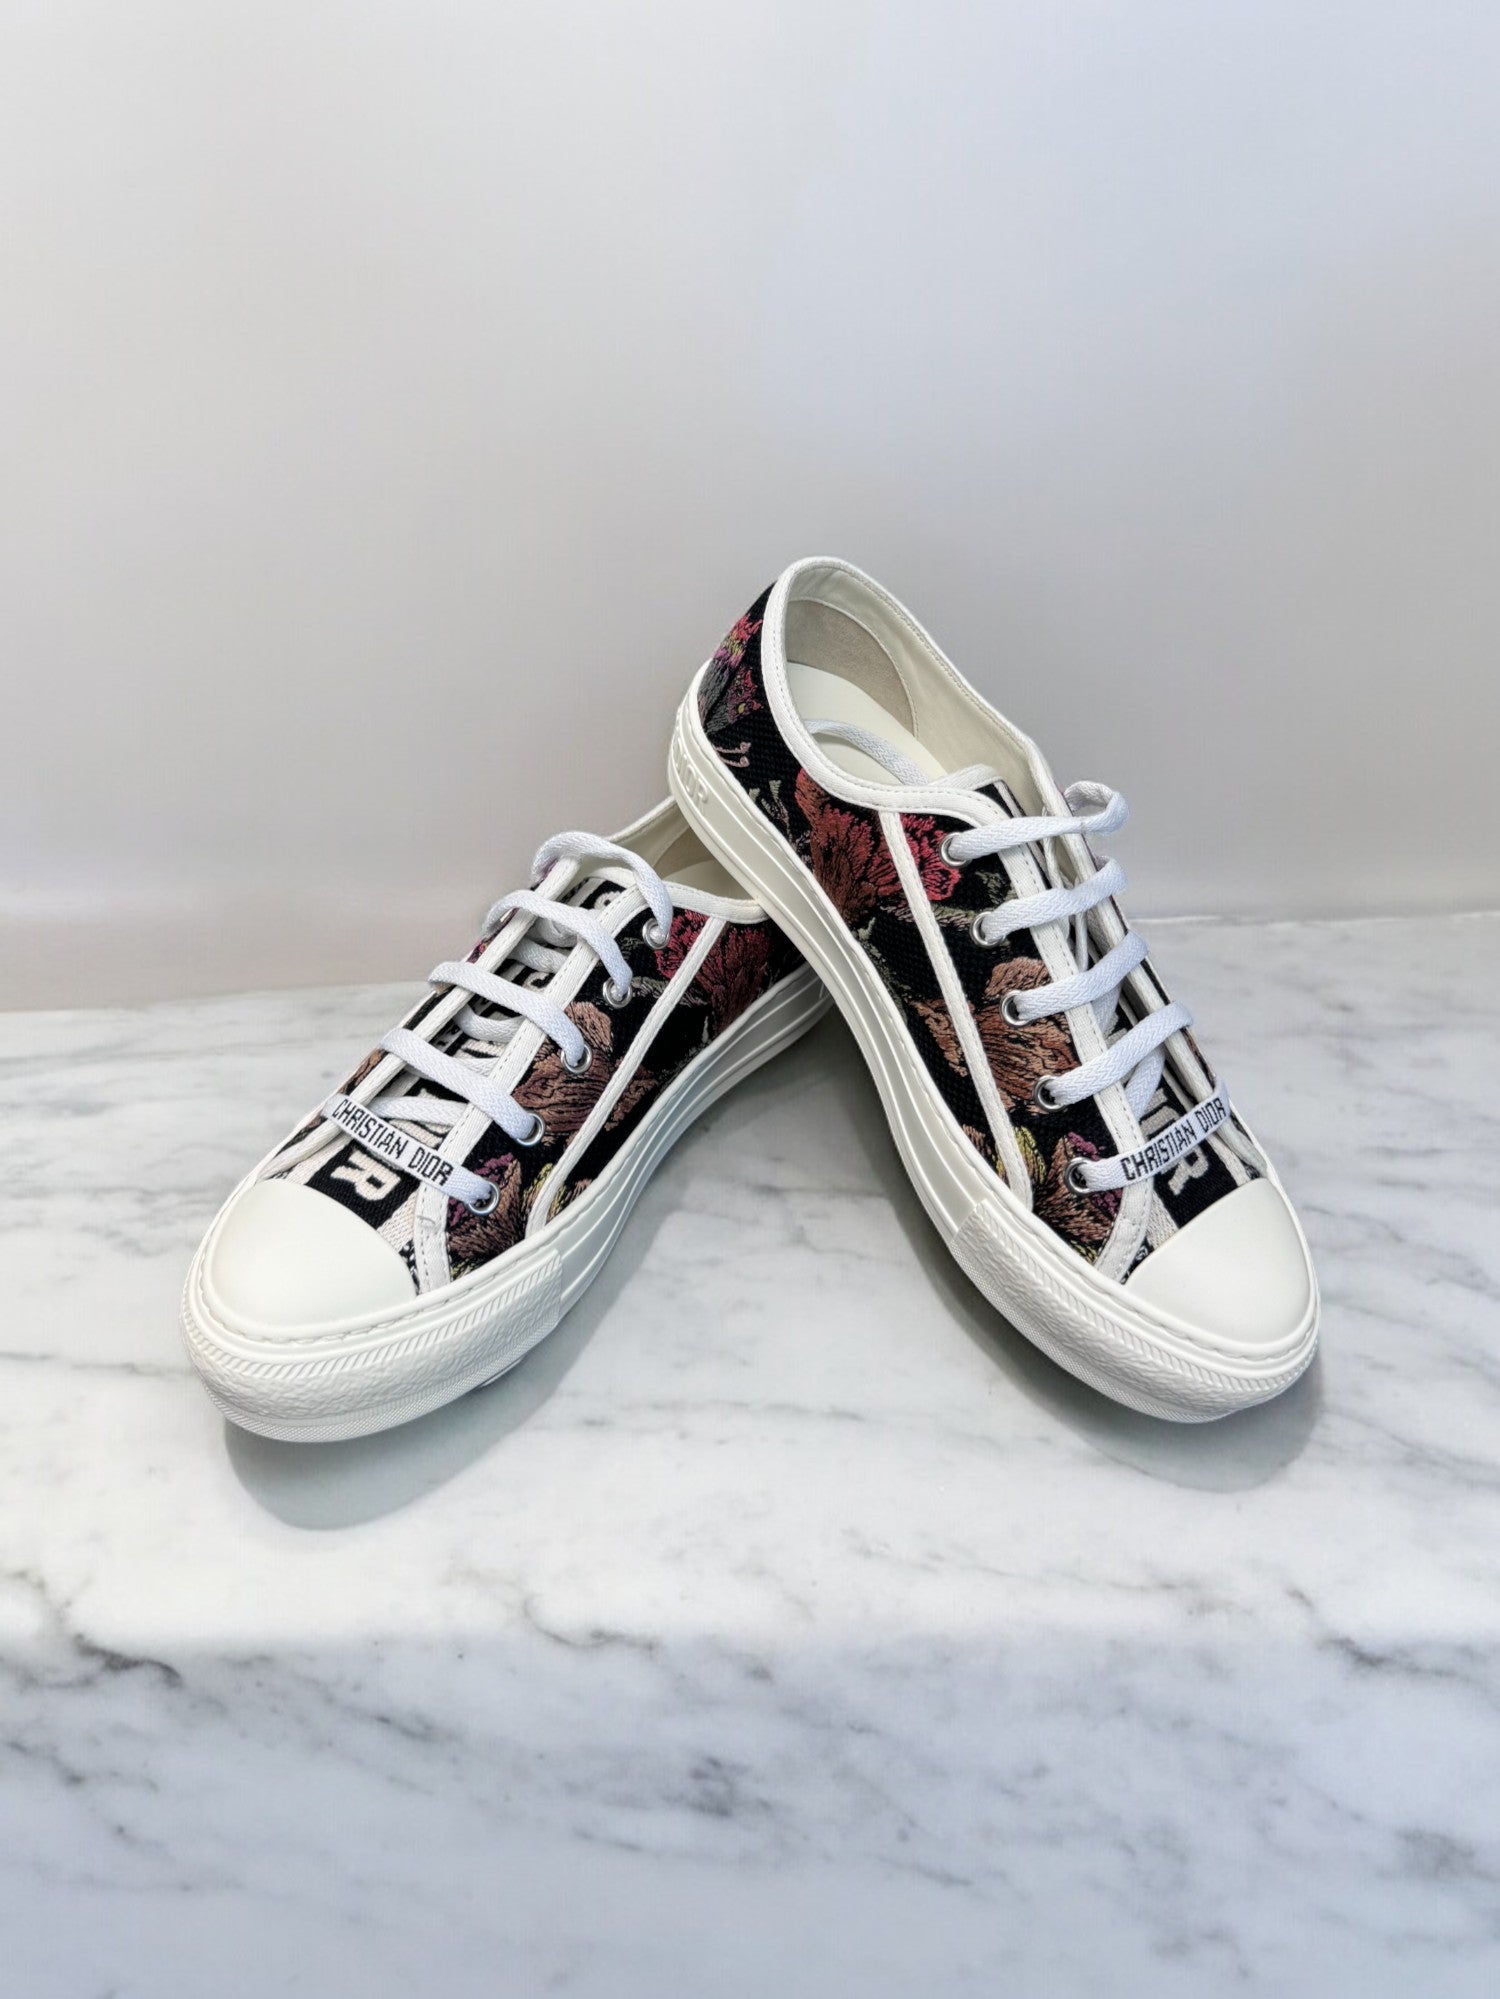 BRAND NEW- Dior Black Floral Sneakers Size 36